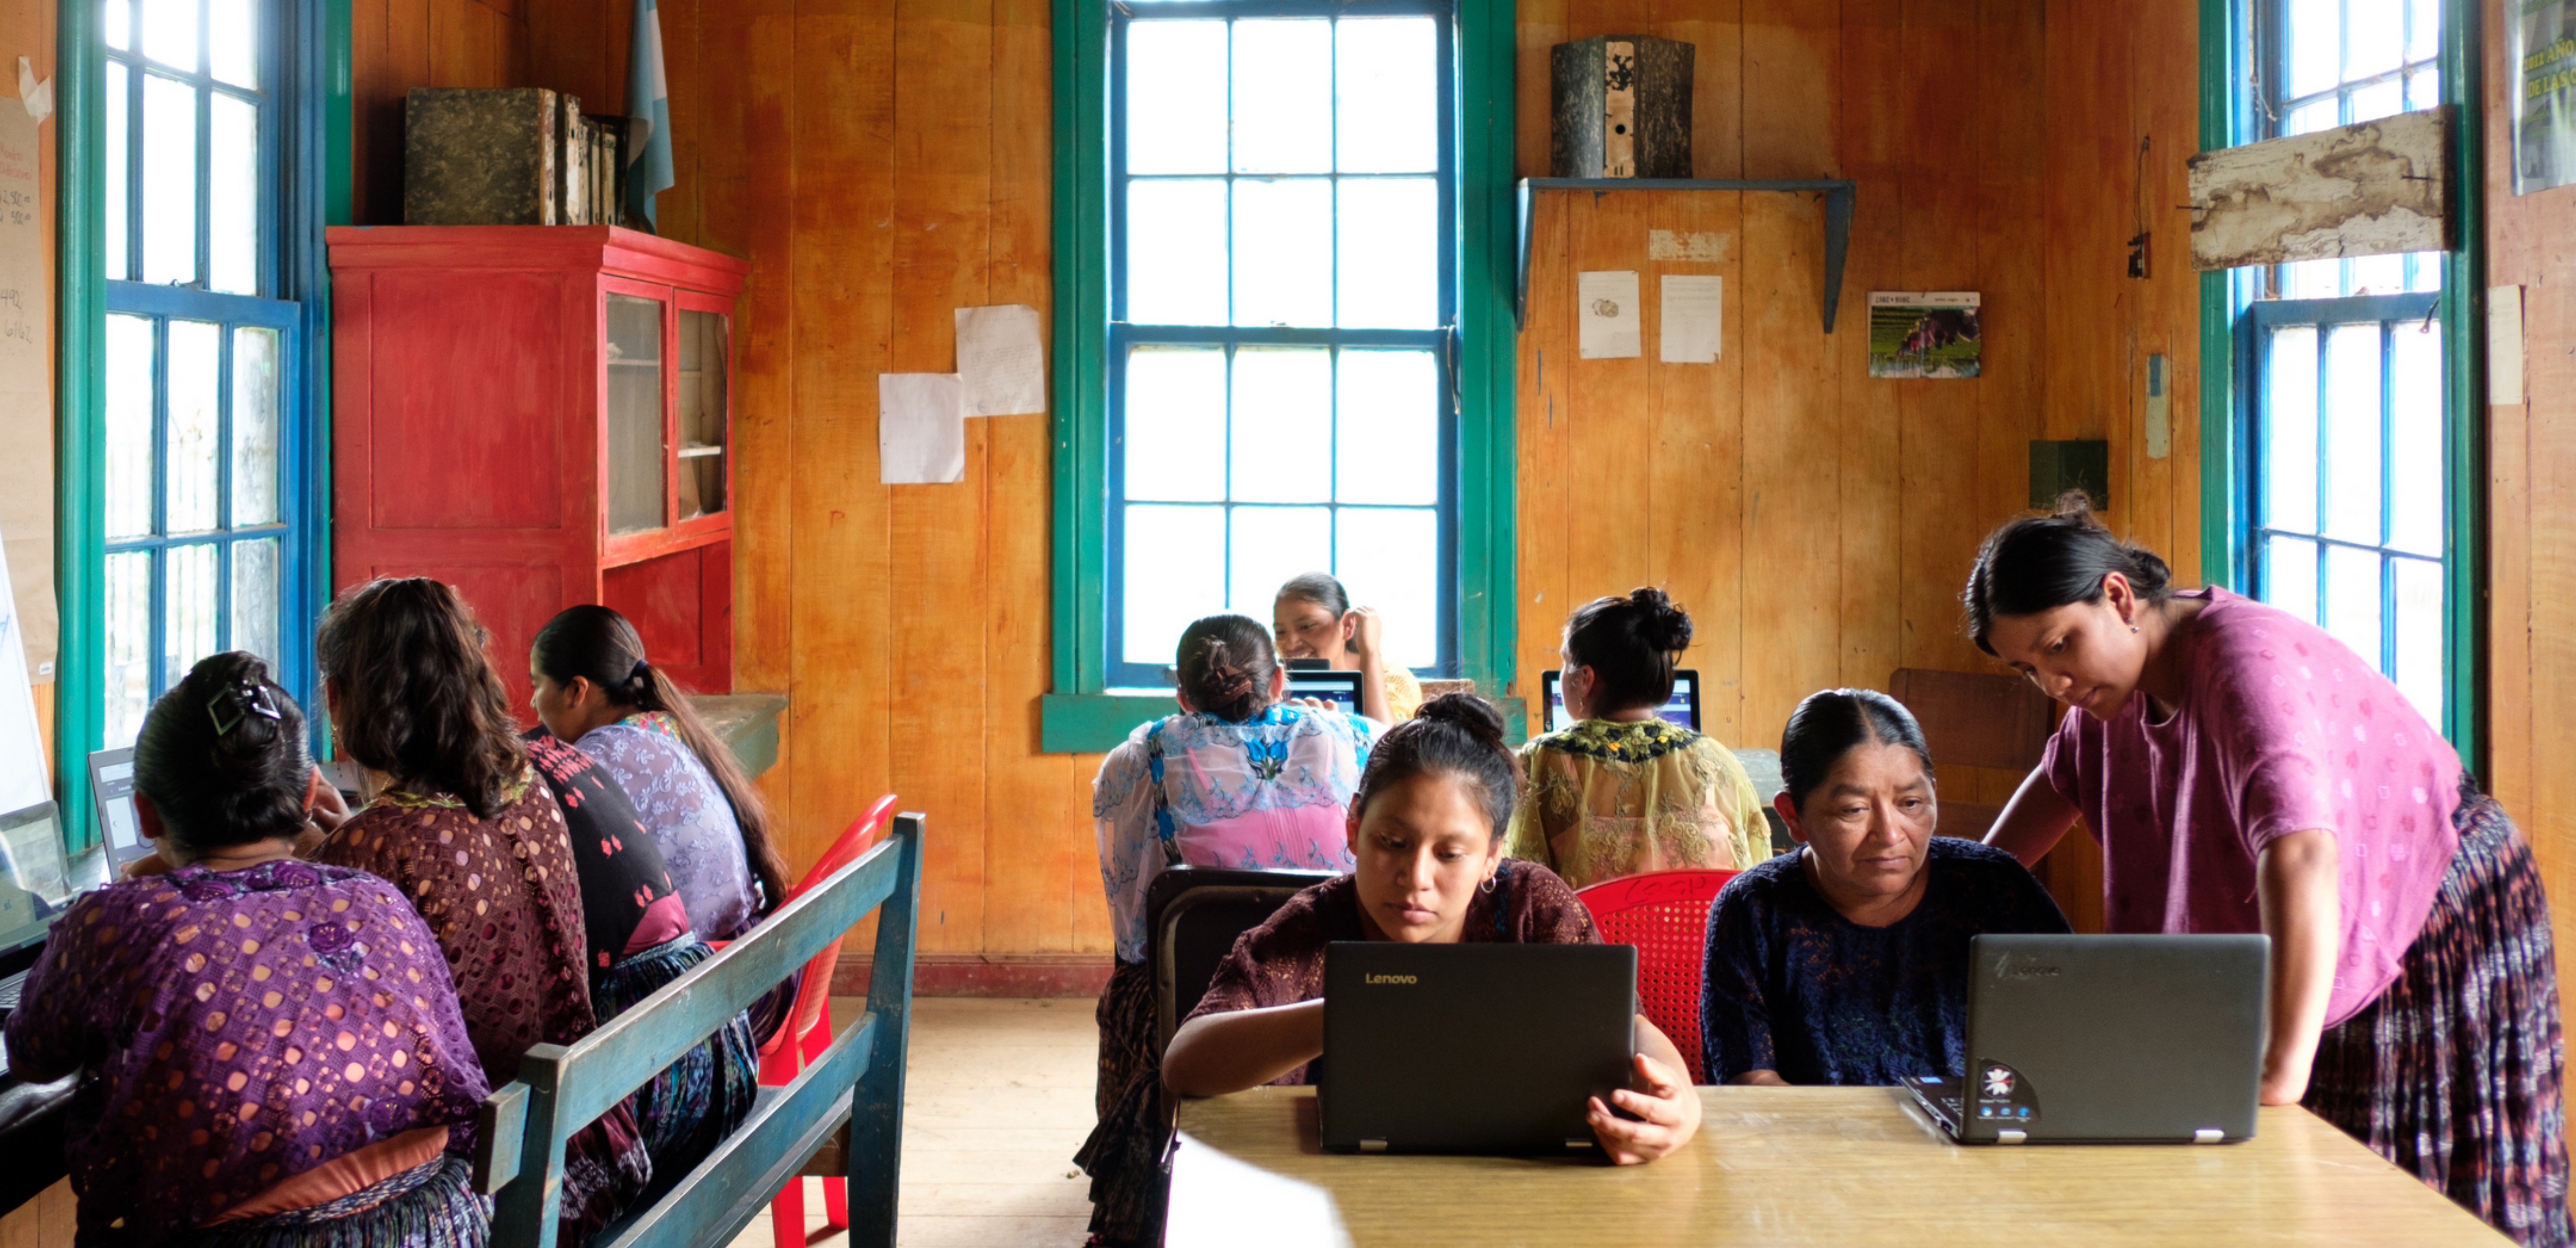 We've launched Accent, a browser-based, digital literacy platform that will help women in remote Guatemala gain access to their country’s economy, government, culture and language.